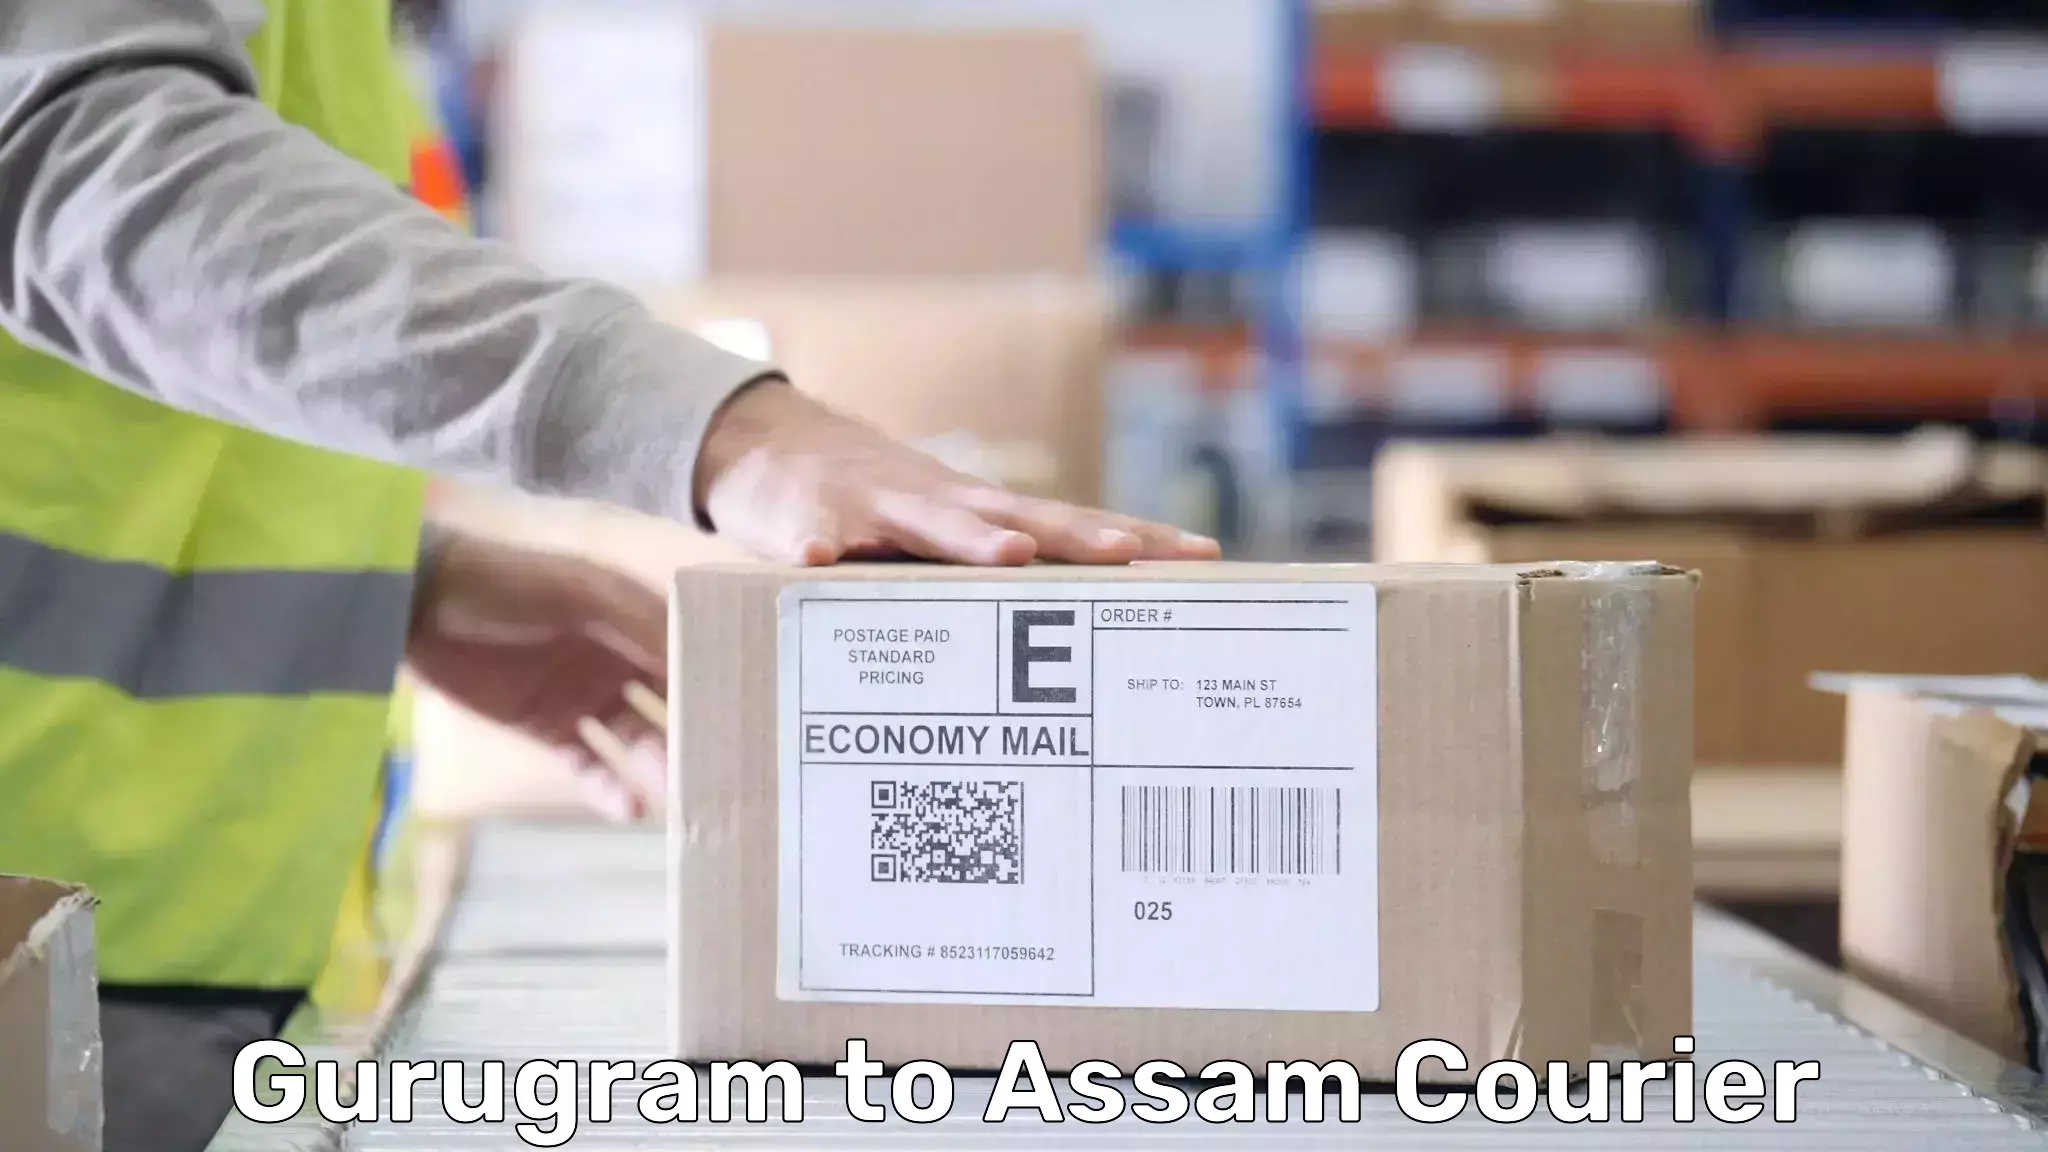 Luggage delivery app Gurugram to Assam